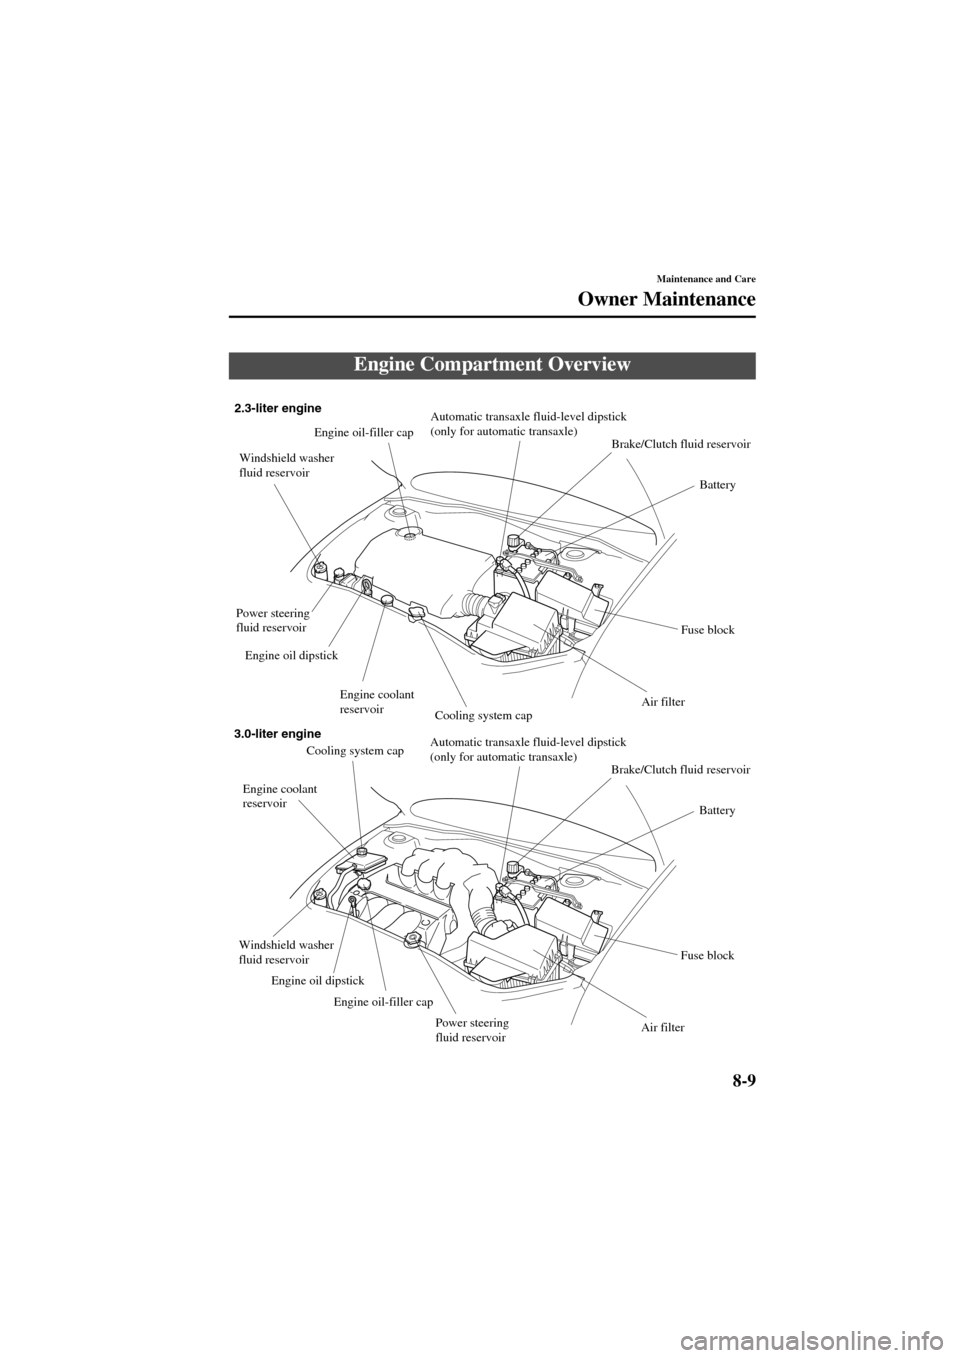 MAZDA MODEL 6 2004  Owners Manual (in English) 8-9
Maintenance and Care
Owner Maintenance
Form No. 8R29-EA-02I
Engine Compartment Overview
Automatic transaxle fluid-level dipstick
(only for automatic transaxle) 
Cooling system cap Power steering 
